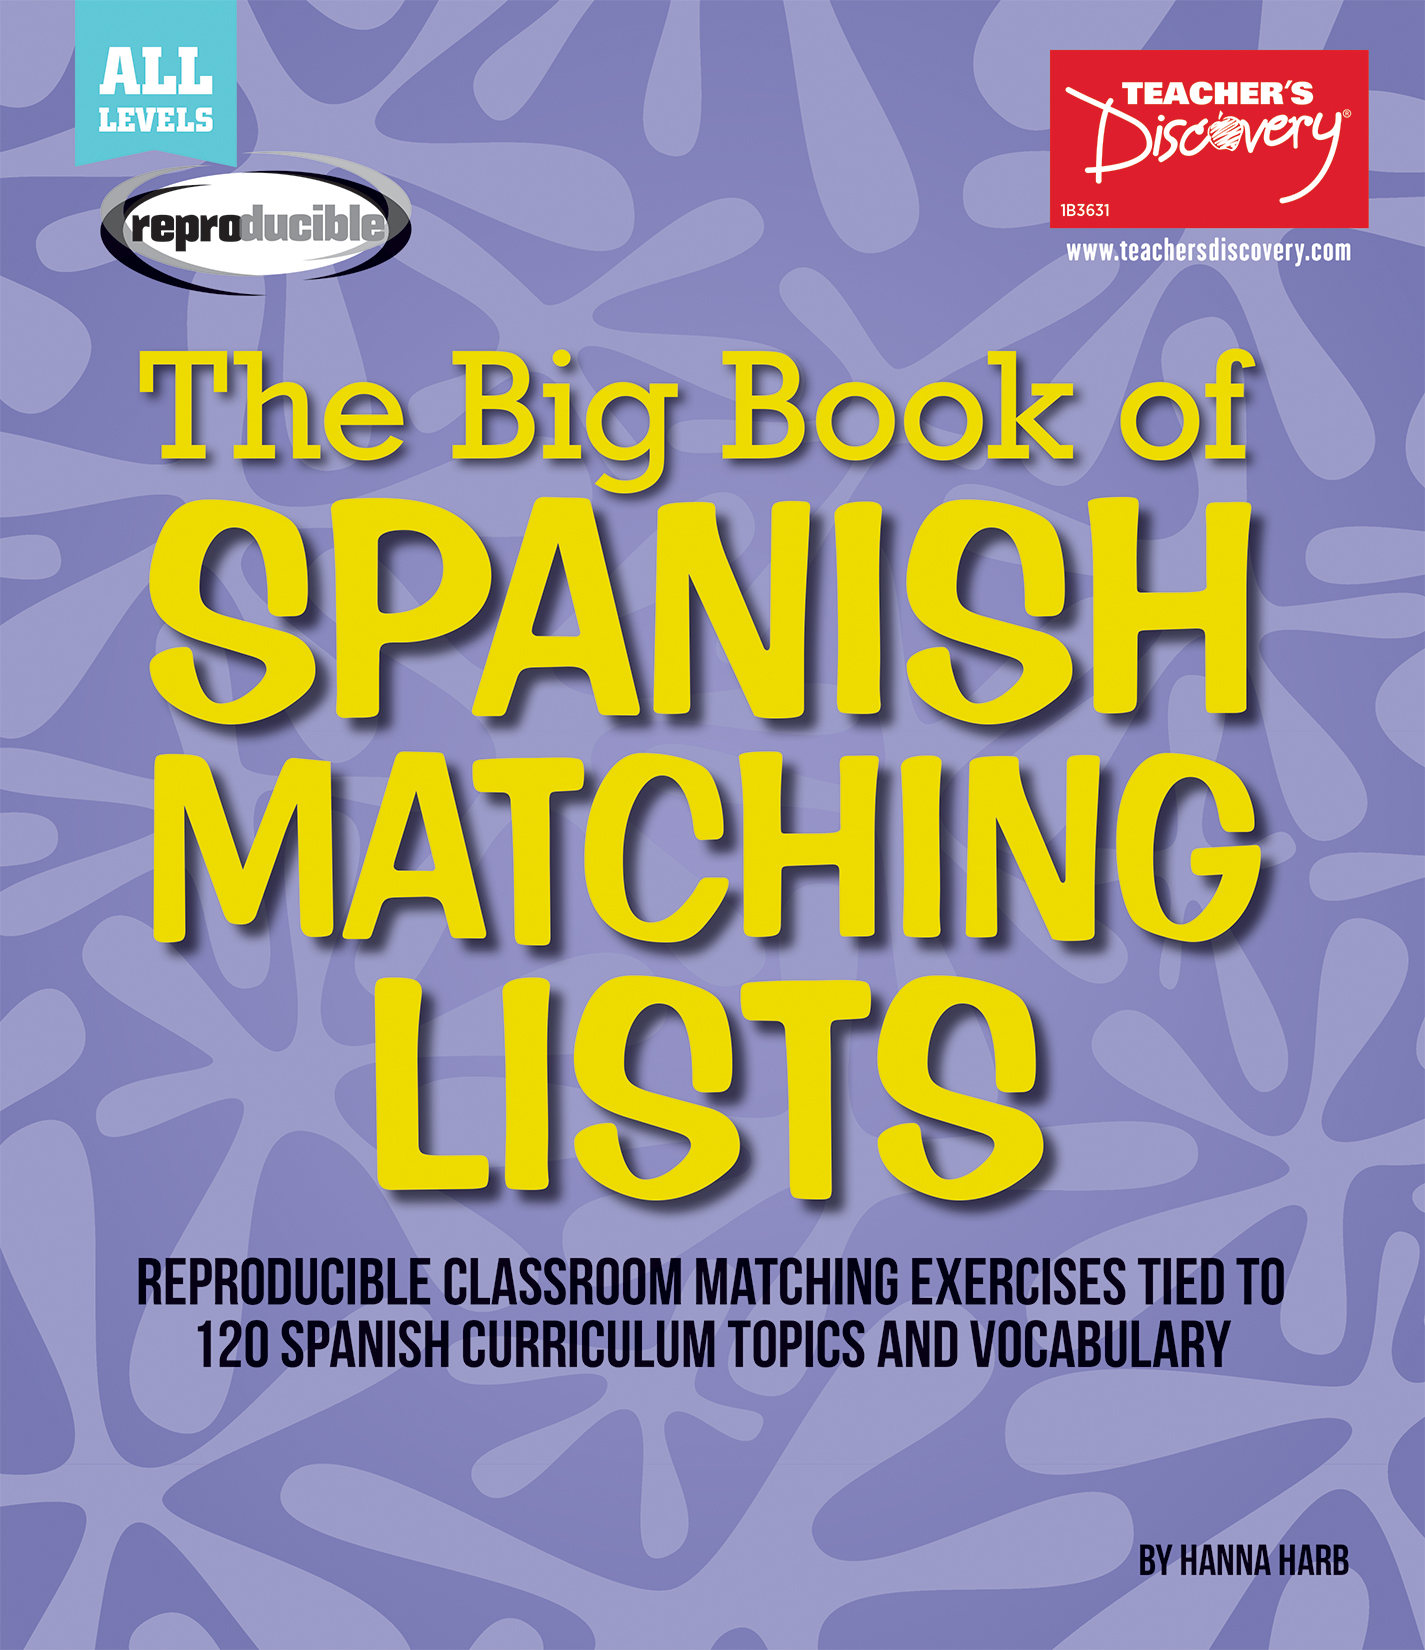 The Big Book of Spanish Matching Lists